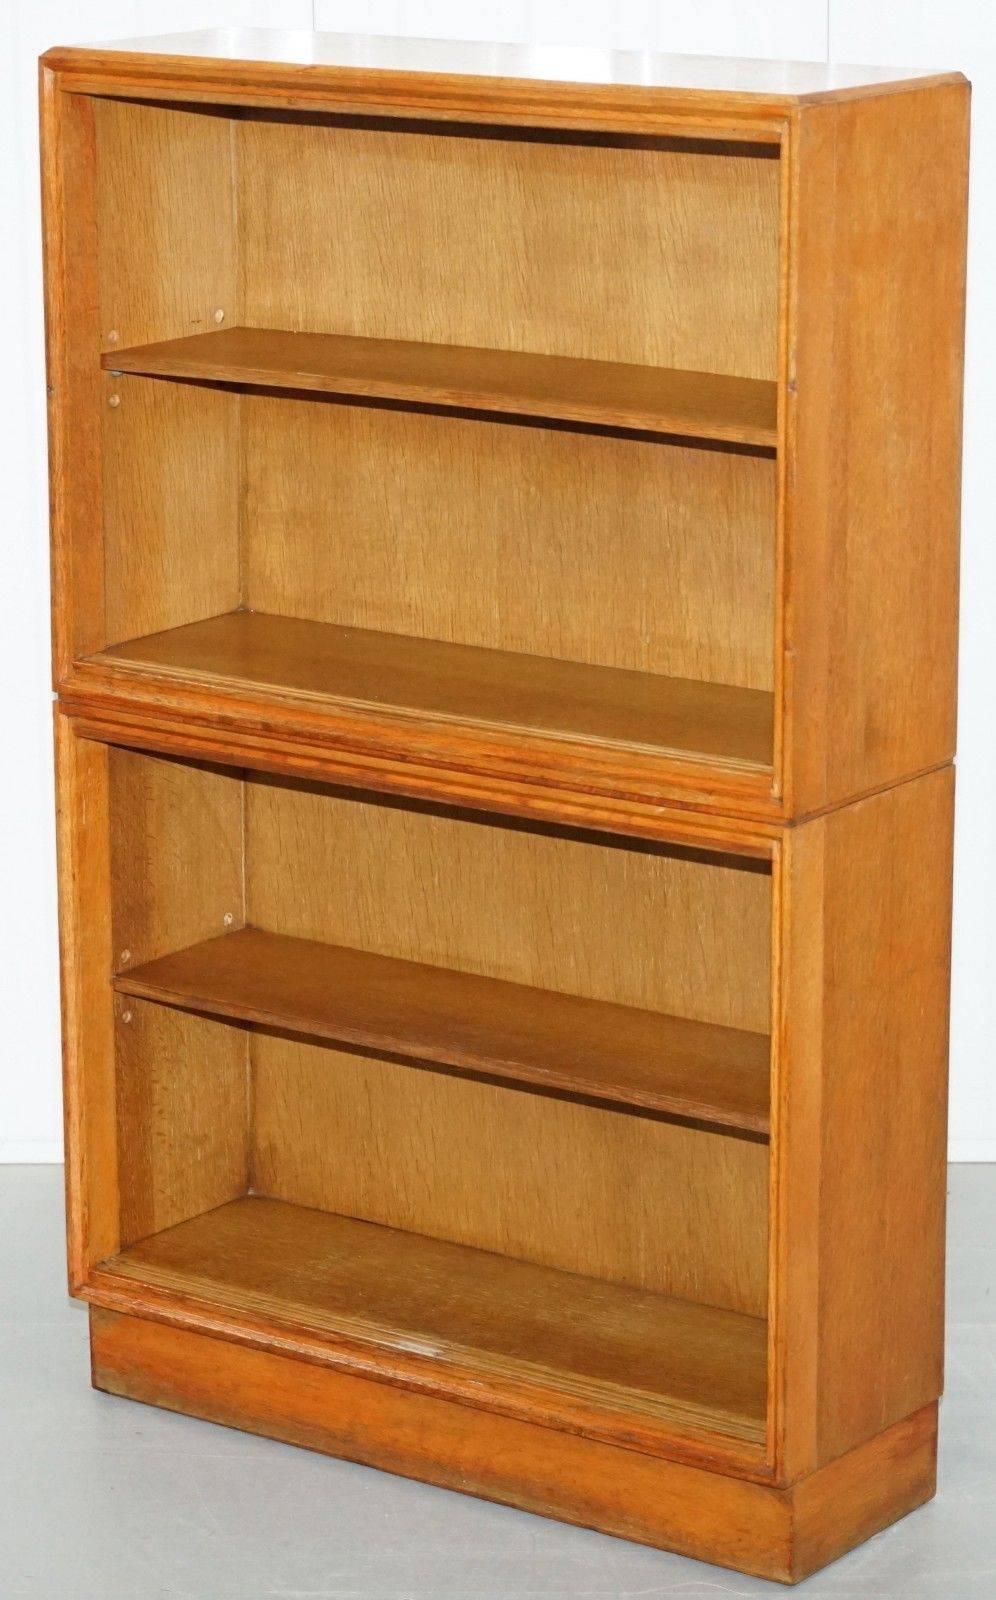 Hand-Carved Meredew Furniture Mid-Century Modern Light Oak Stacking Bookcase Made in England